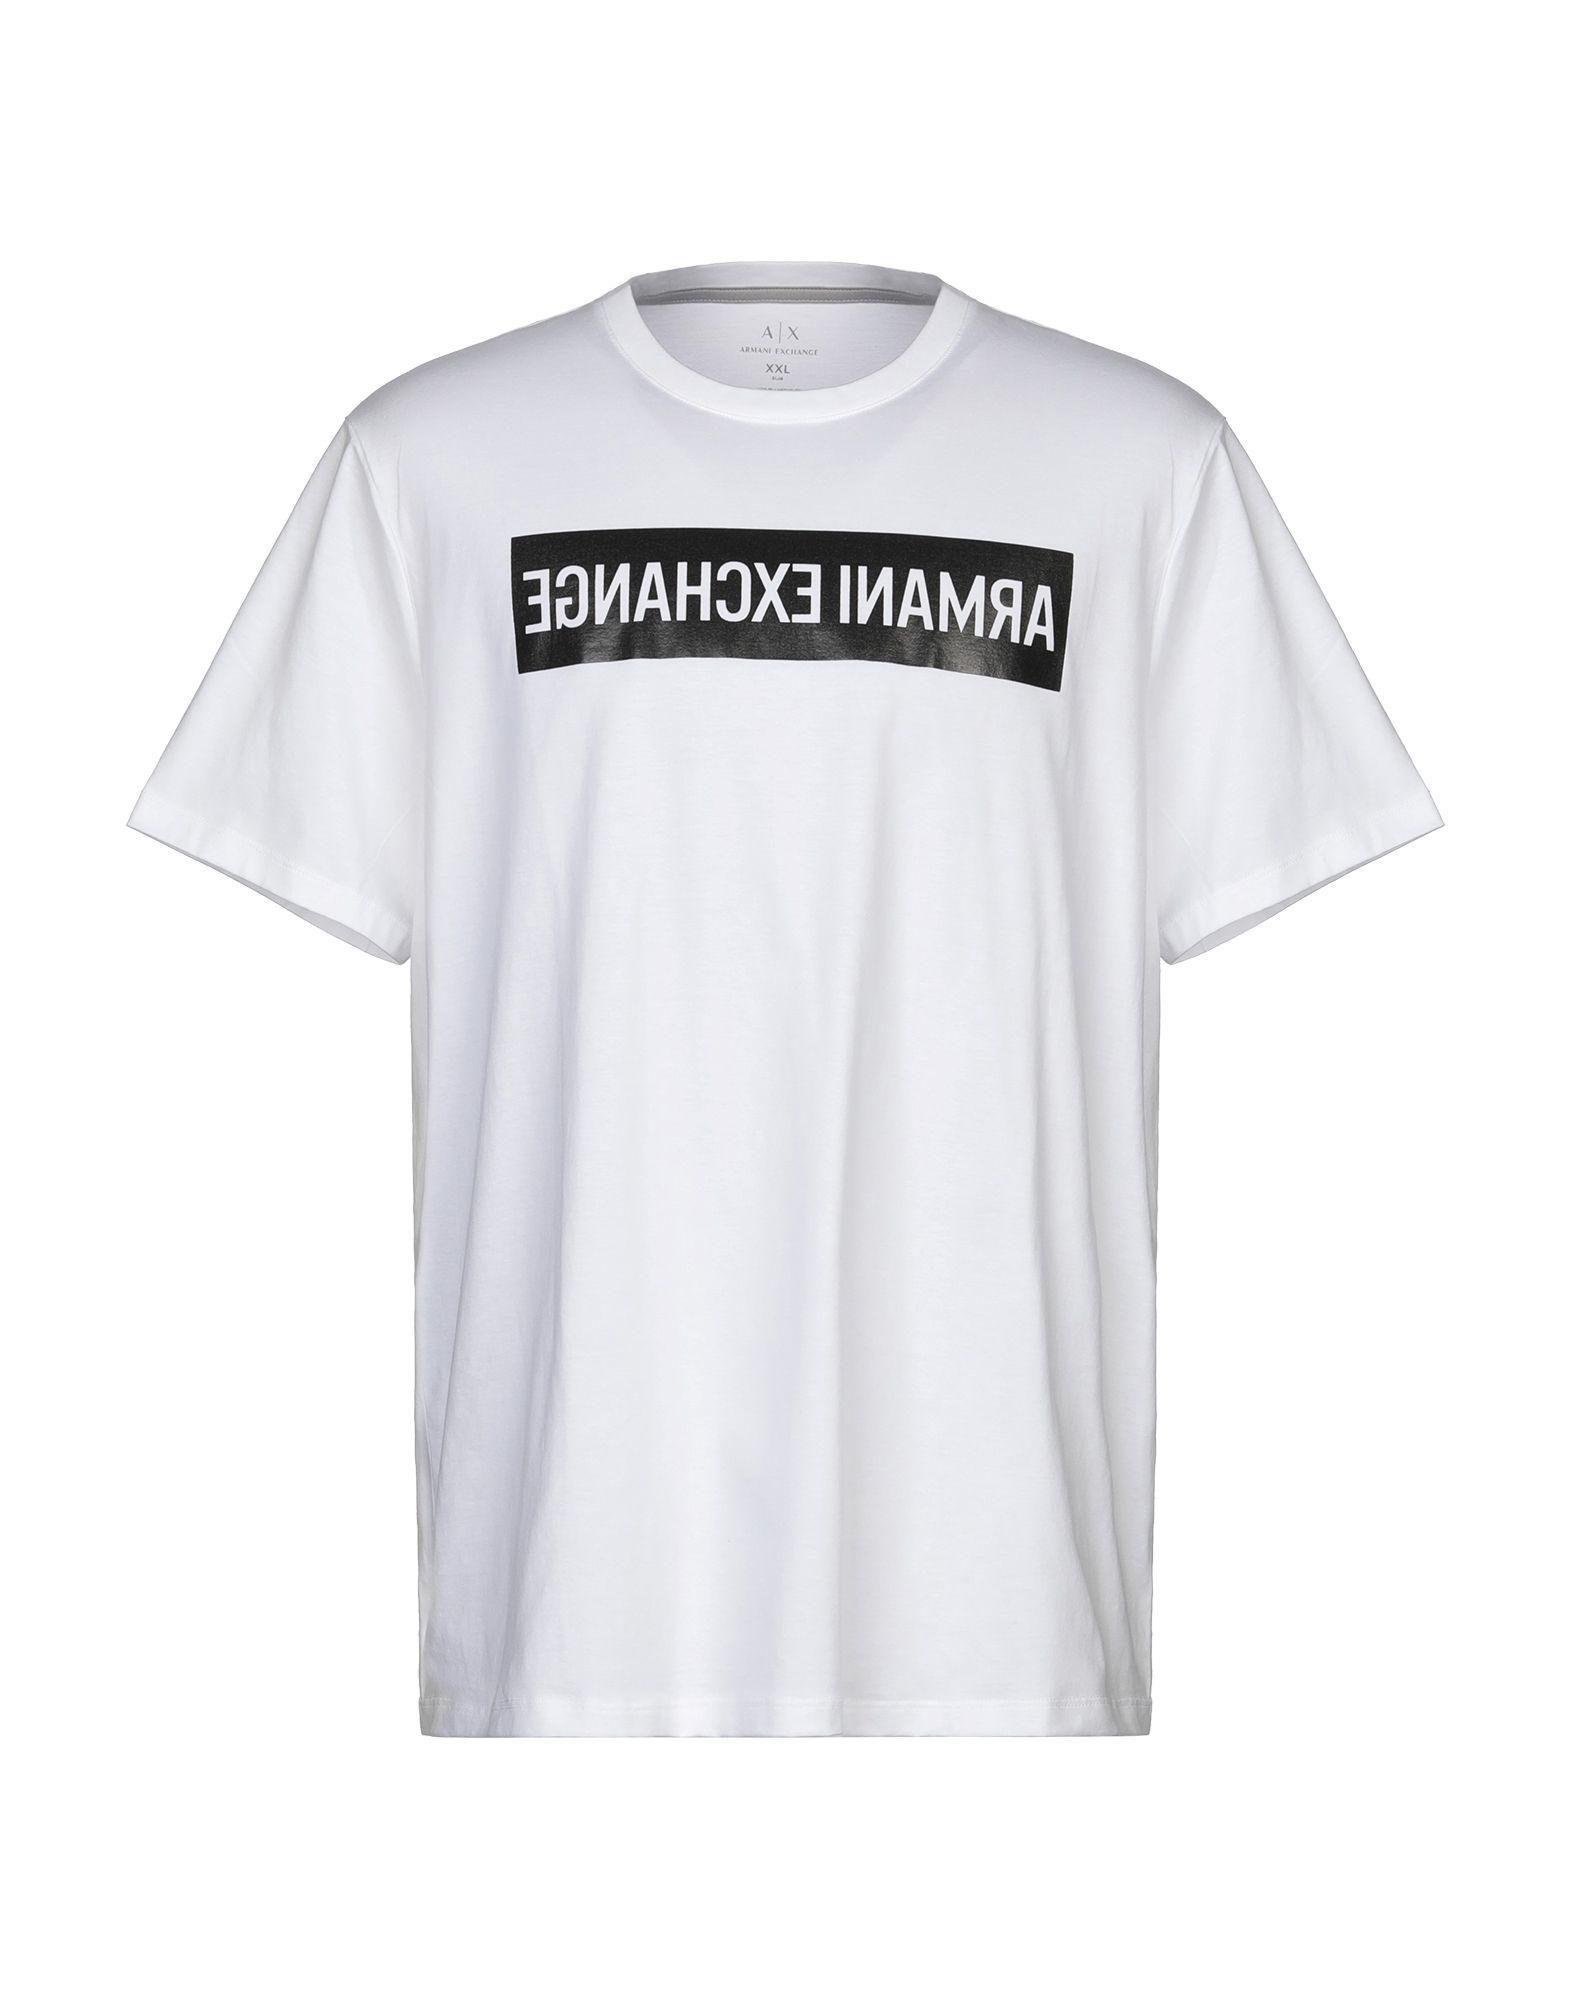 Armani Exchange T-shirt in White for Men - Lyst